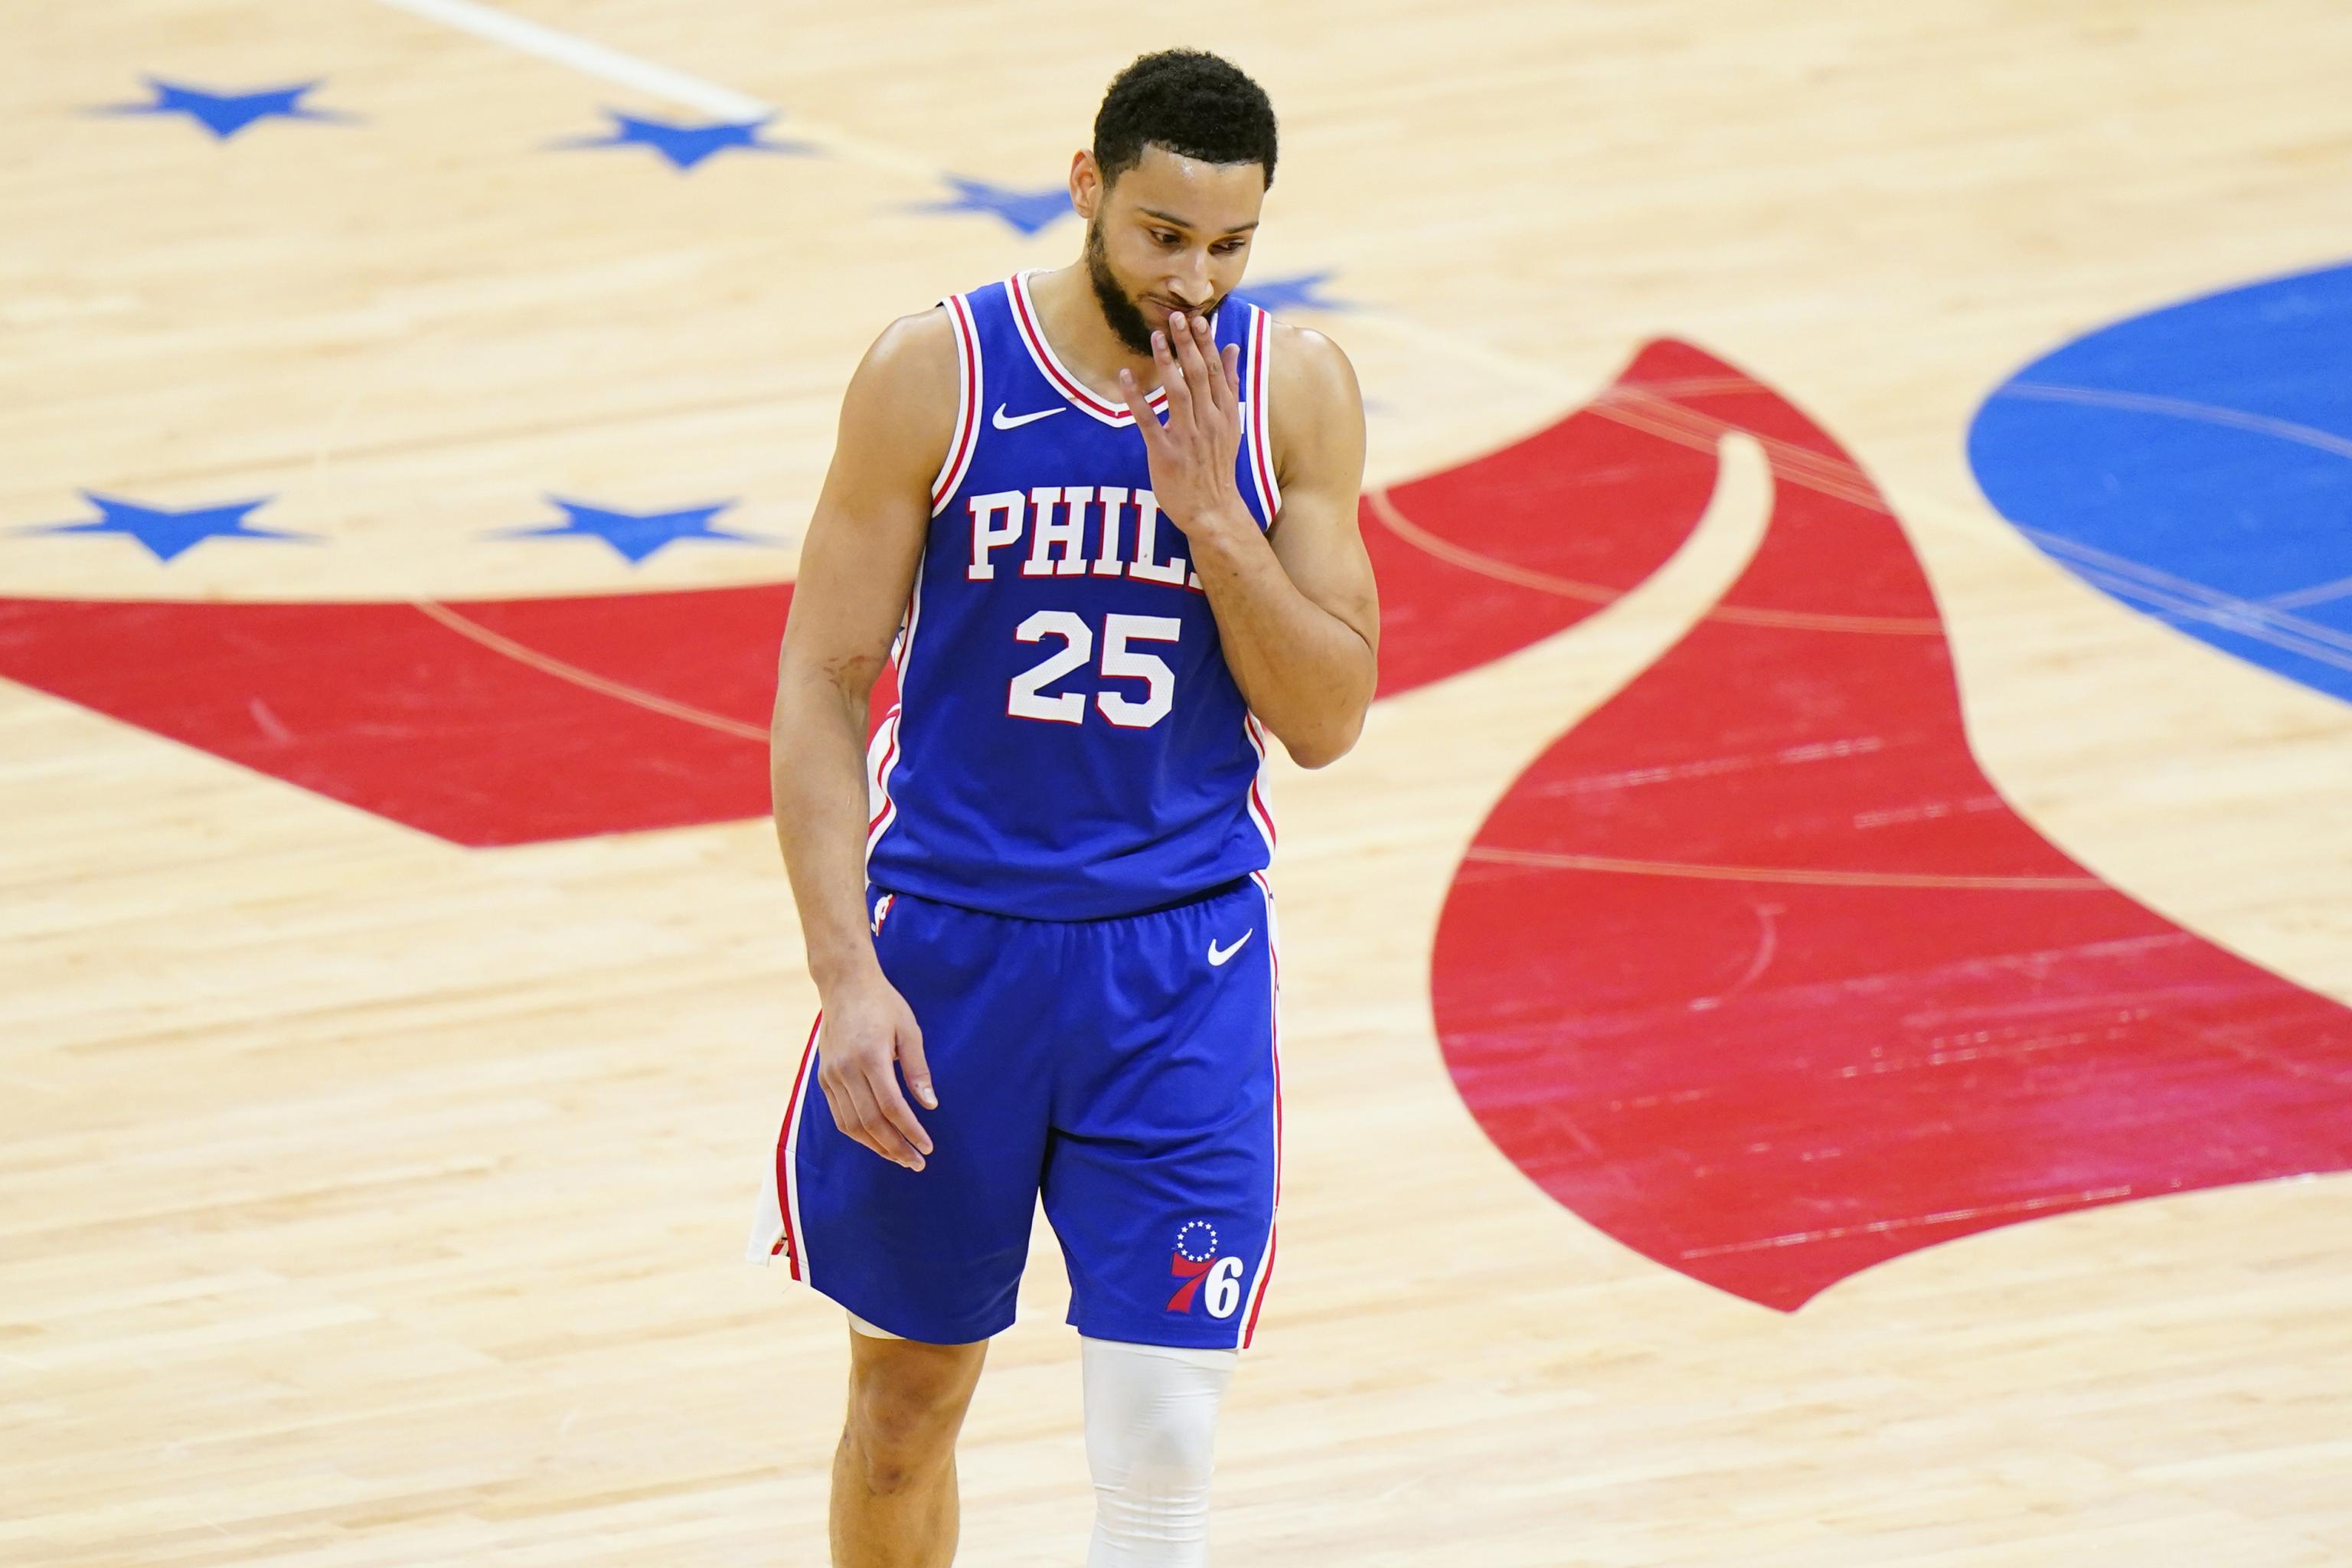 Basketball Forever - Ben Simmons has been putting in work! He's